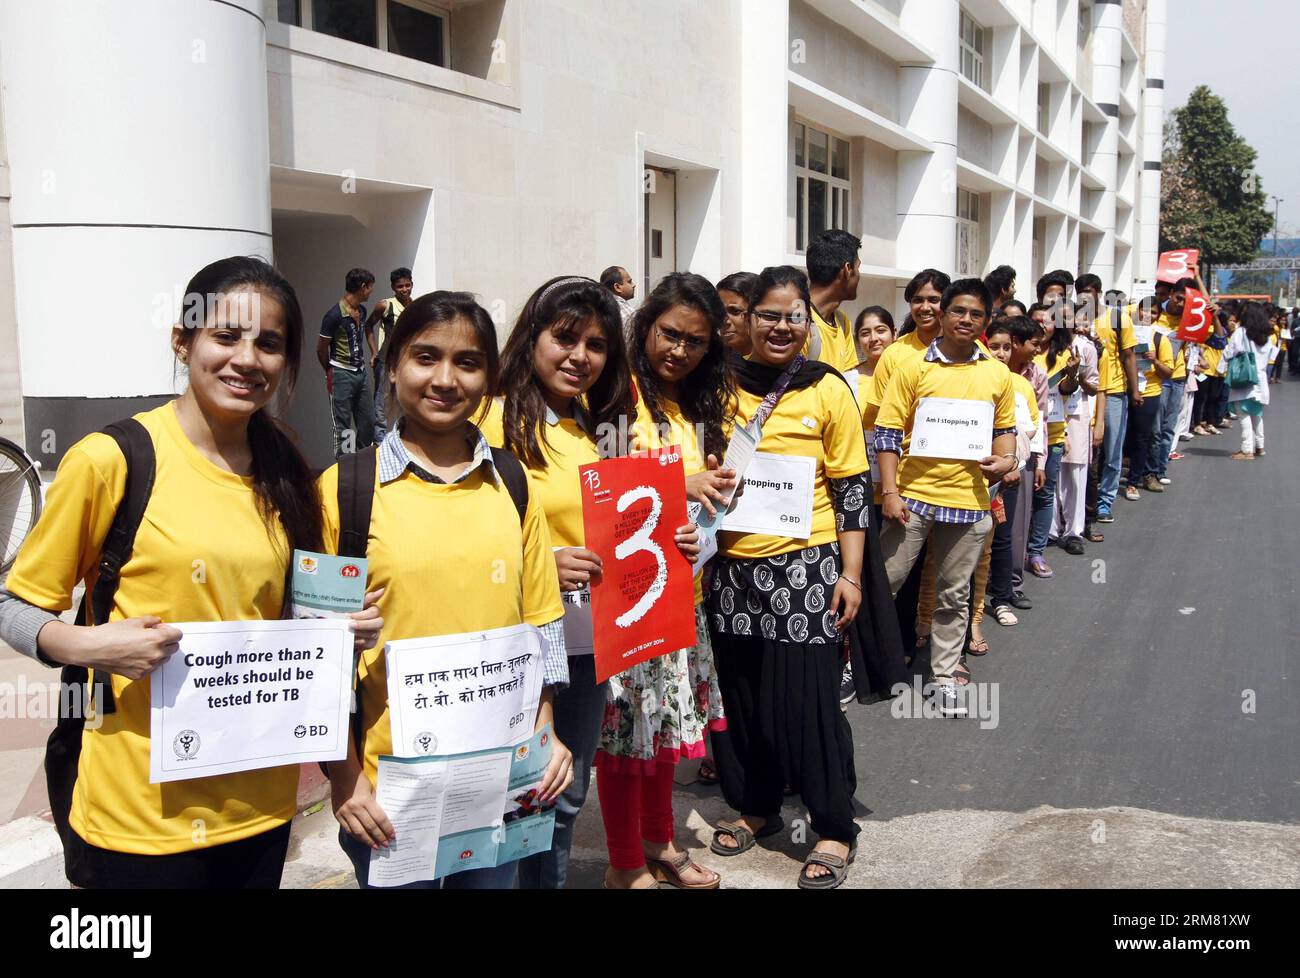 (140324) -- NEW DELHI, March 24, 2014 (Xinhua) -- Interns and doctors of All India Institute of Medical Sciences (AIIMS) display placards during an awareness program on the World Tuberculosis Day at the AIIMS campus in New Delhi, India, March 24, 2014. World Tuberculosis Day is designated to raise the common public awareness about the global epidemic disease of tuberculosis. (Xinhua/Partha Sarkar)(zhf) INDIA-NEW DELHI-WORLD TUBERCULOSIS DAY PUBLICATIONxNOTxINxCHN   New Delhi March 24 2014 XINHUA  and Doctors of All India Institute of Medical Sciences  Display placards during to Awareness Progr Stock Photo